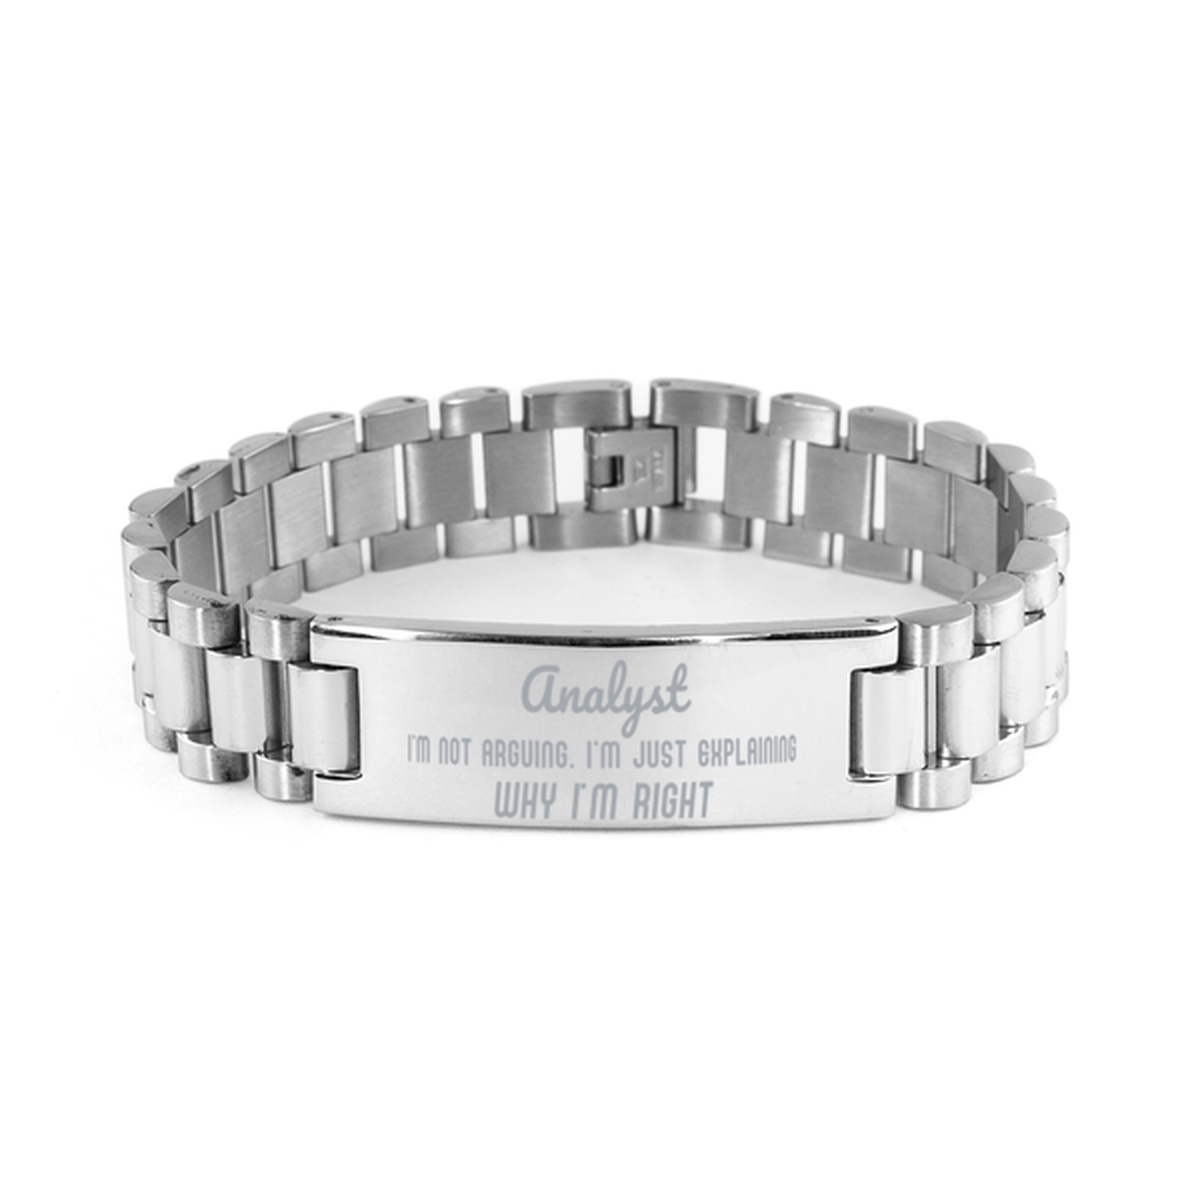 Analyst I'm not Arguing. I'm Just Explaining Why I'm RIGHT Ladder Stainless Steel Bracelet, Graduation Birthday Christmas Analyst Gifts For Analyst Funny Saying Quote Present for Men Women Coworker